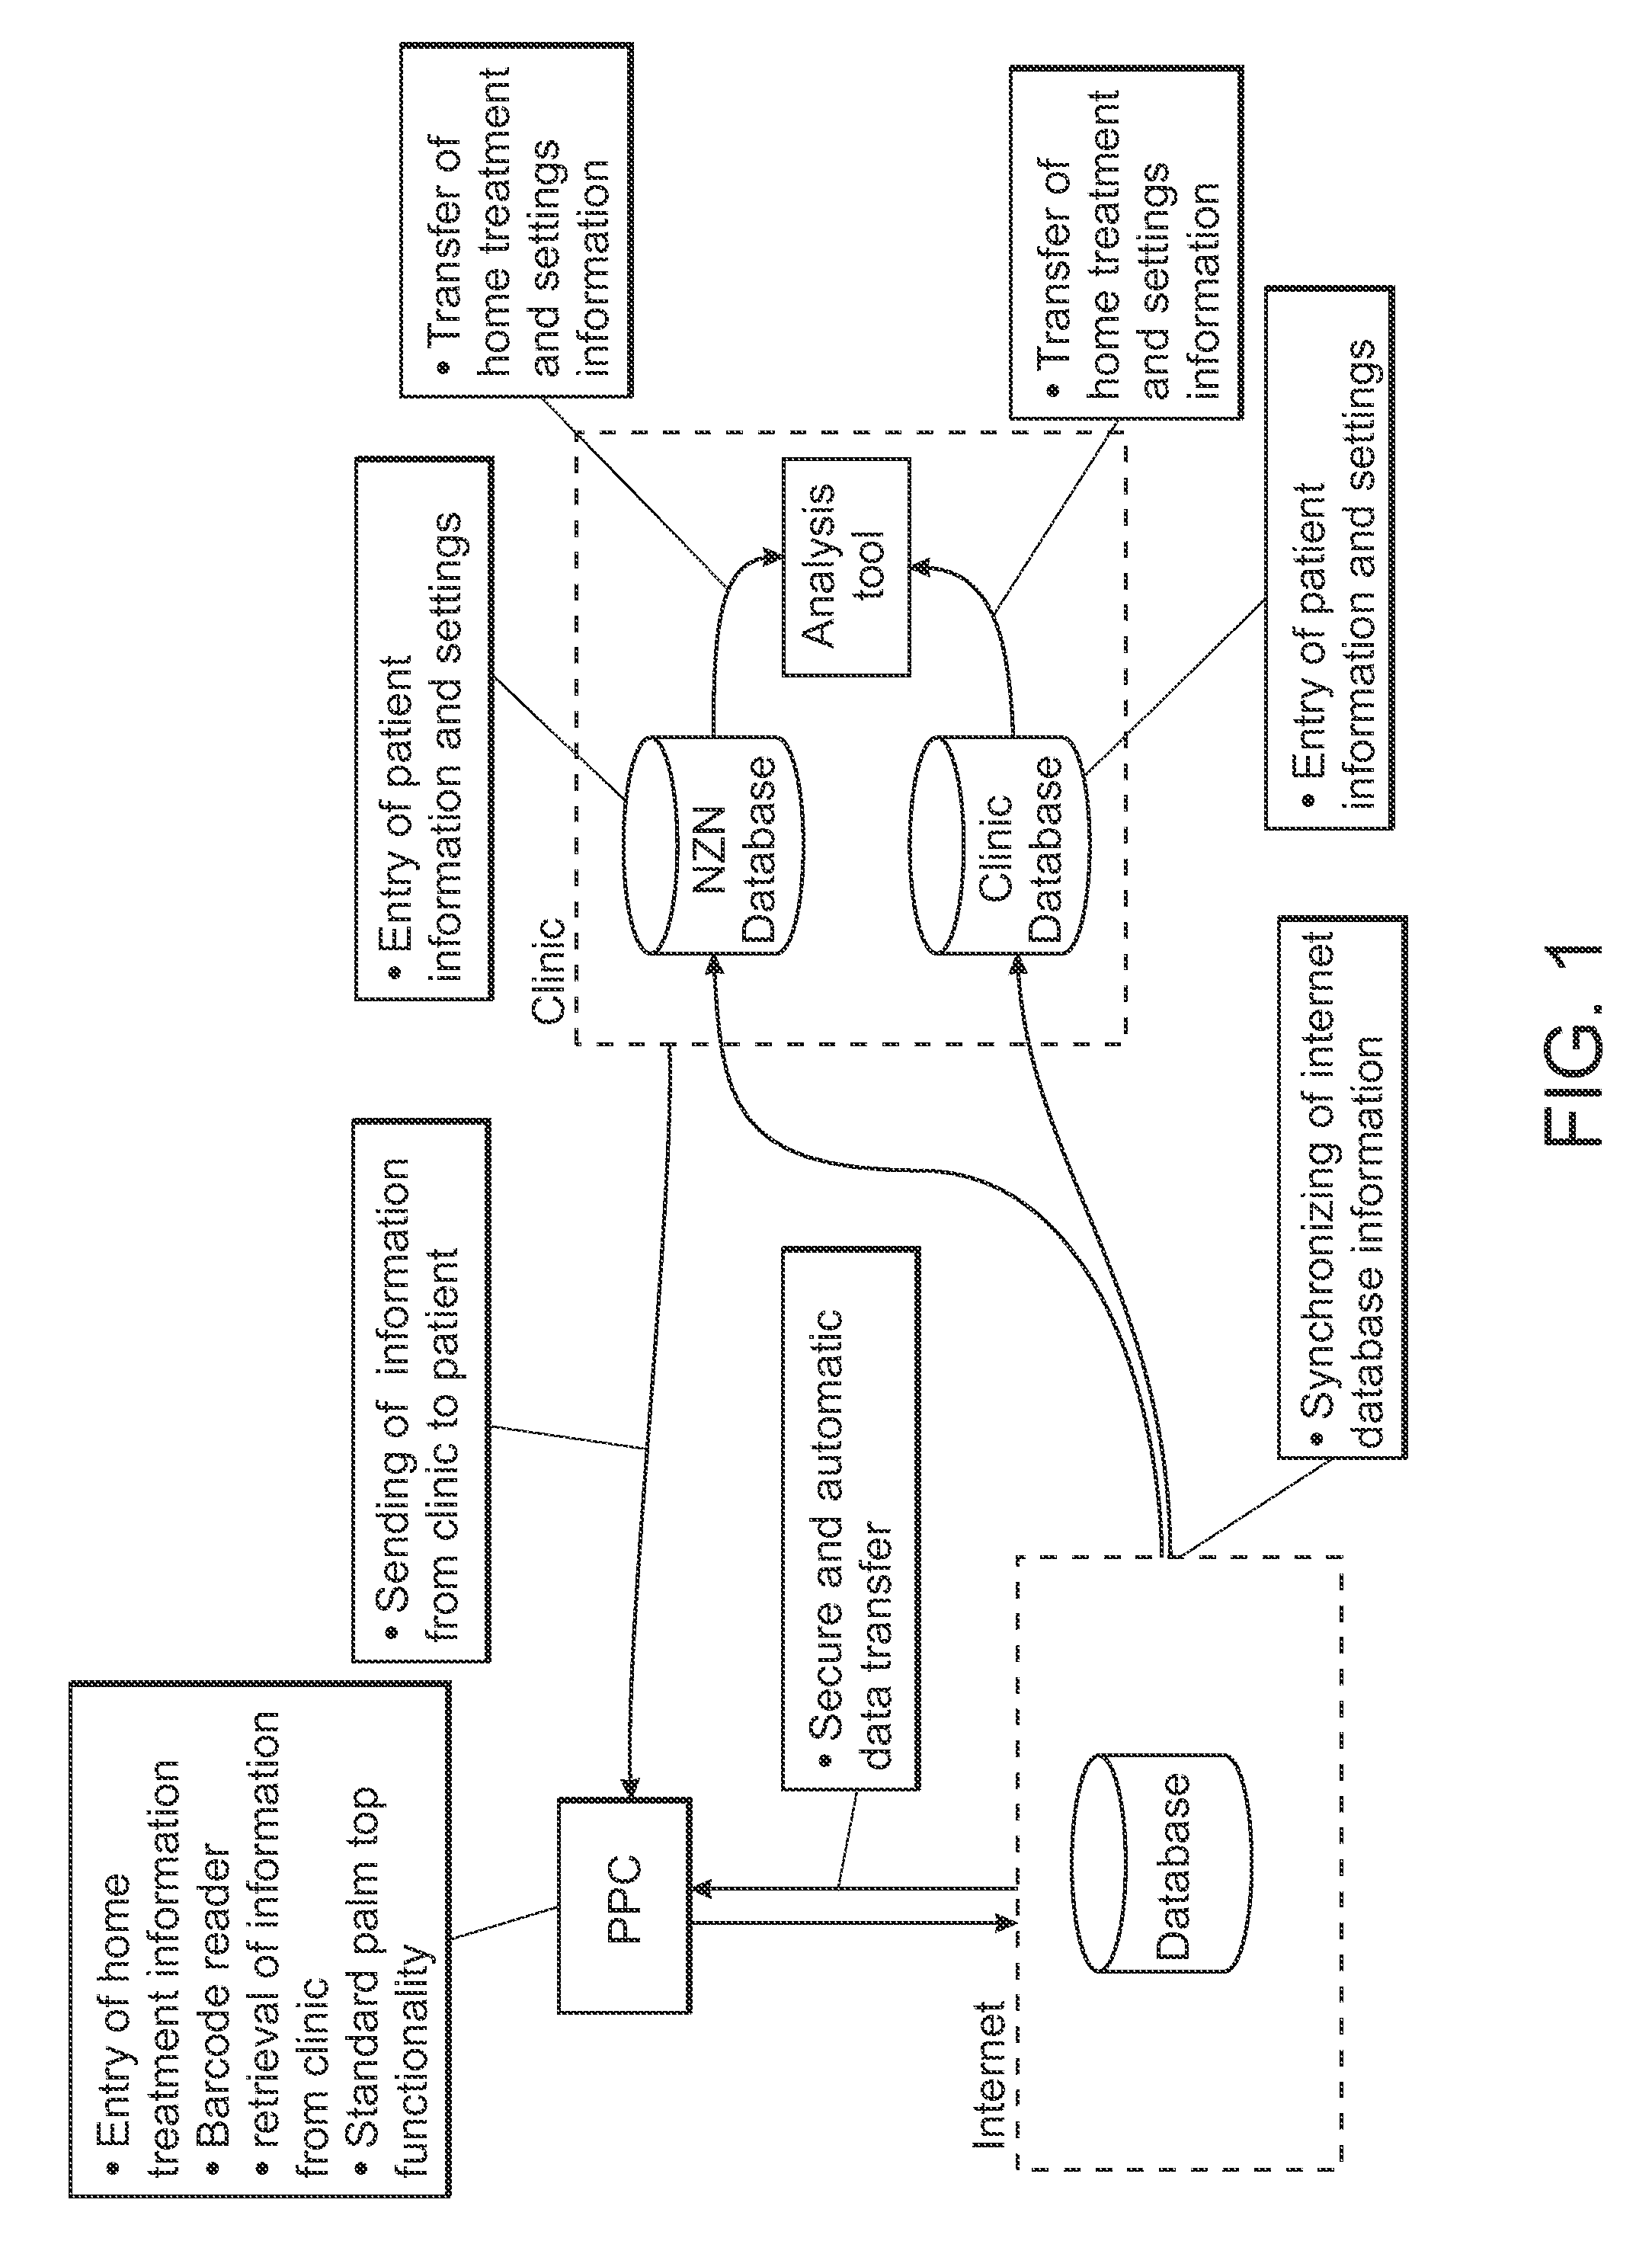 System and method for assisting in the home treatment of a medical condition